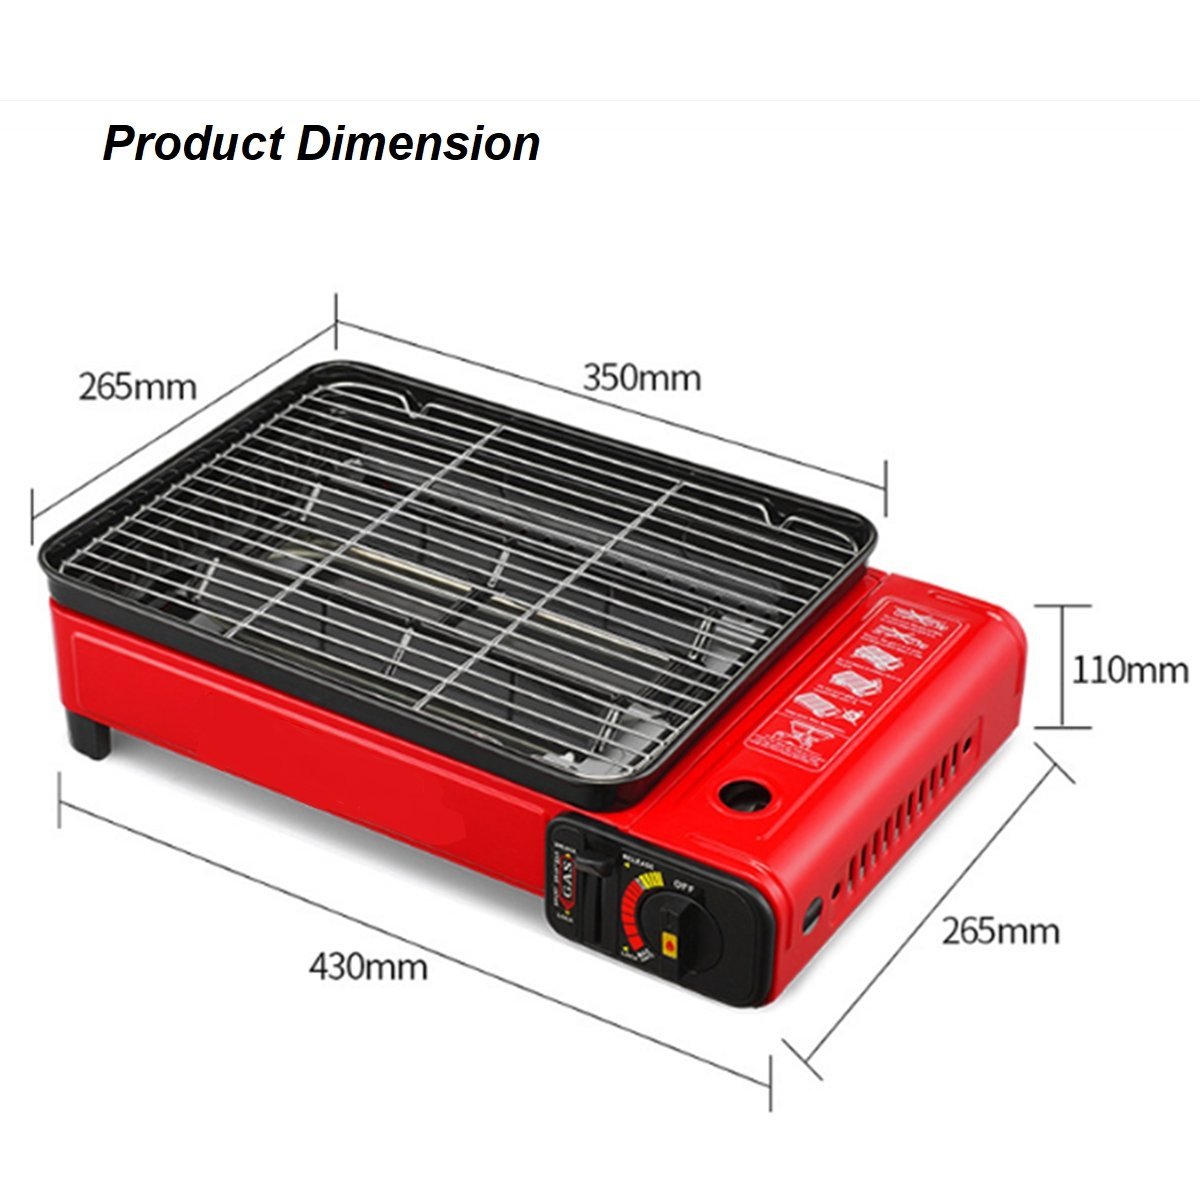 Portable Gas Stove Burner Butane BBQ Camping Gas Cooker With Non Stick Plate Orange Deals499